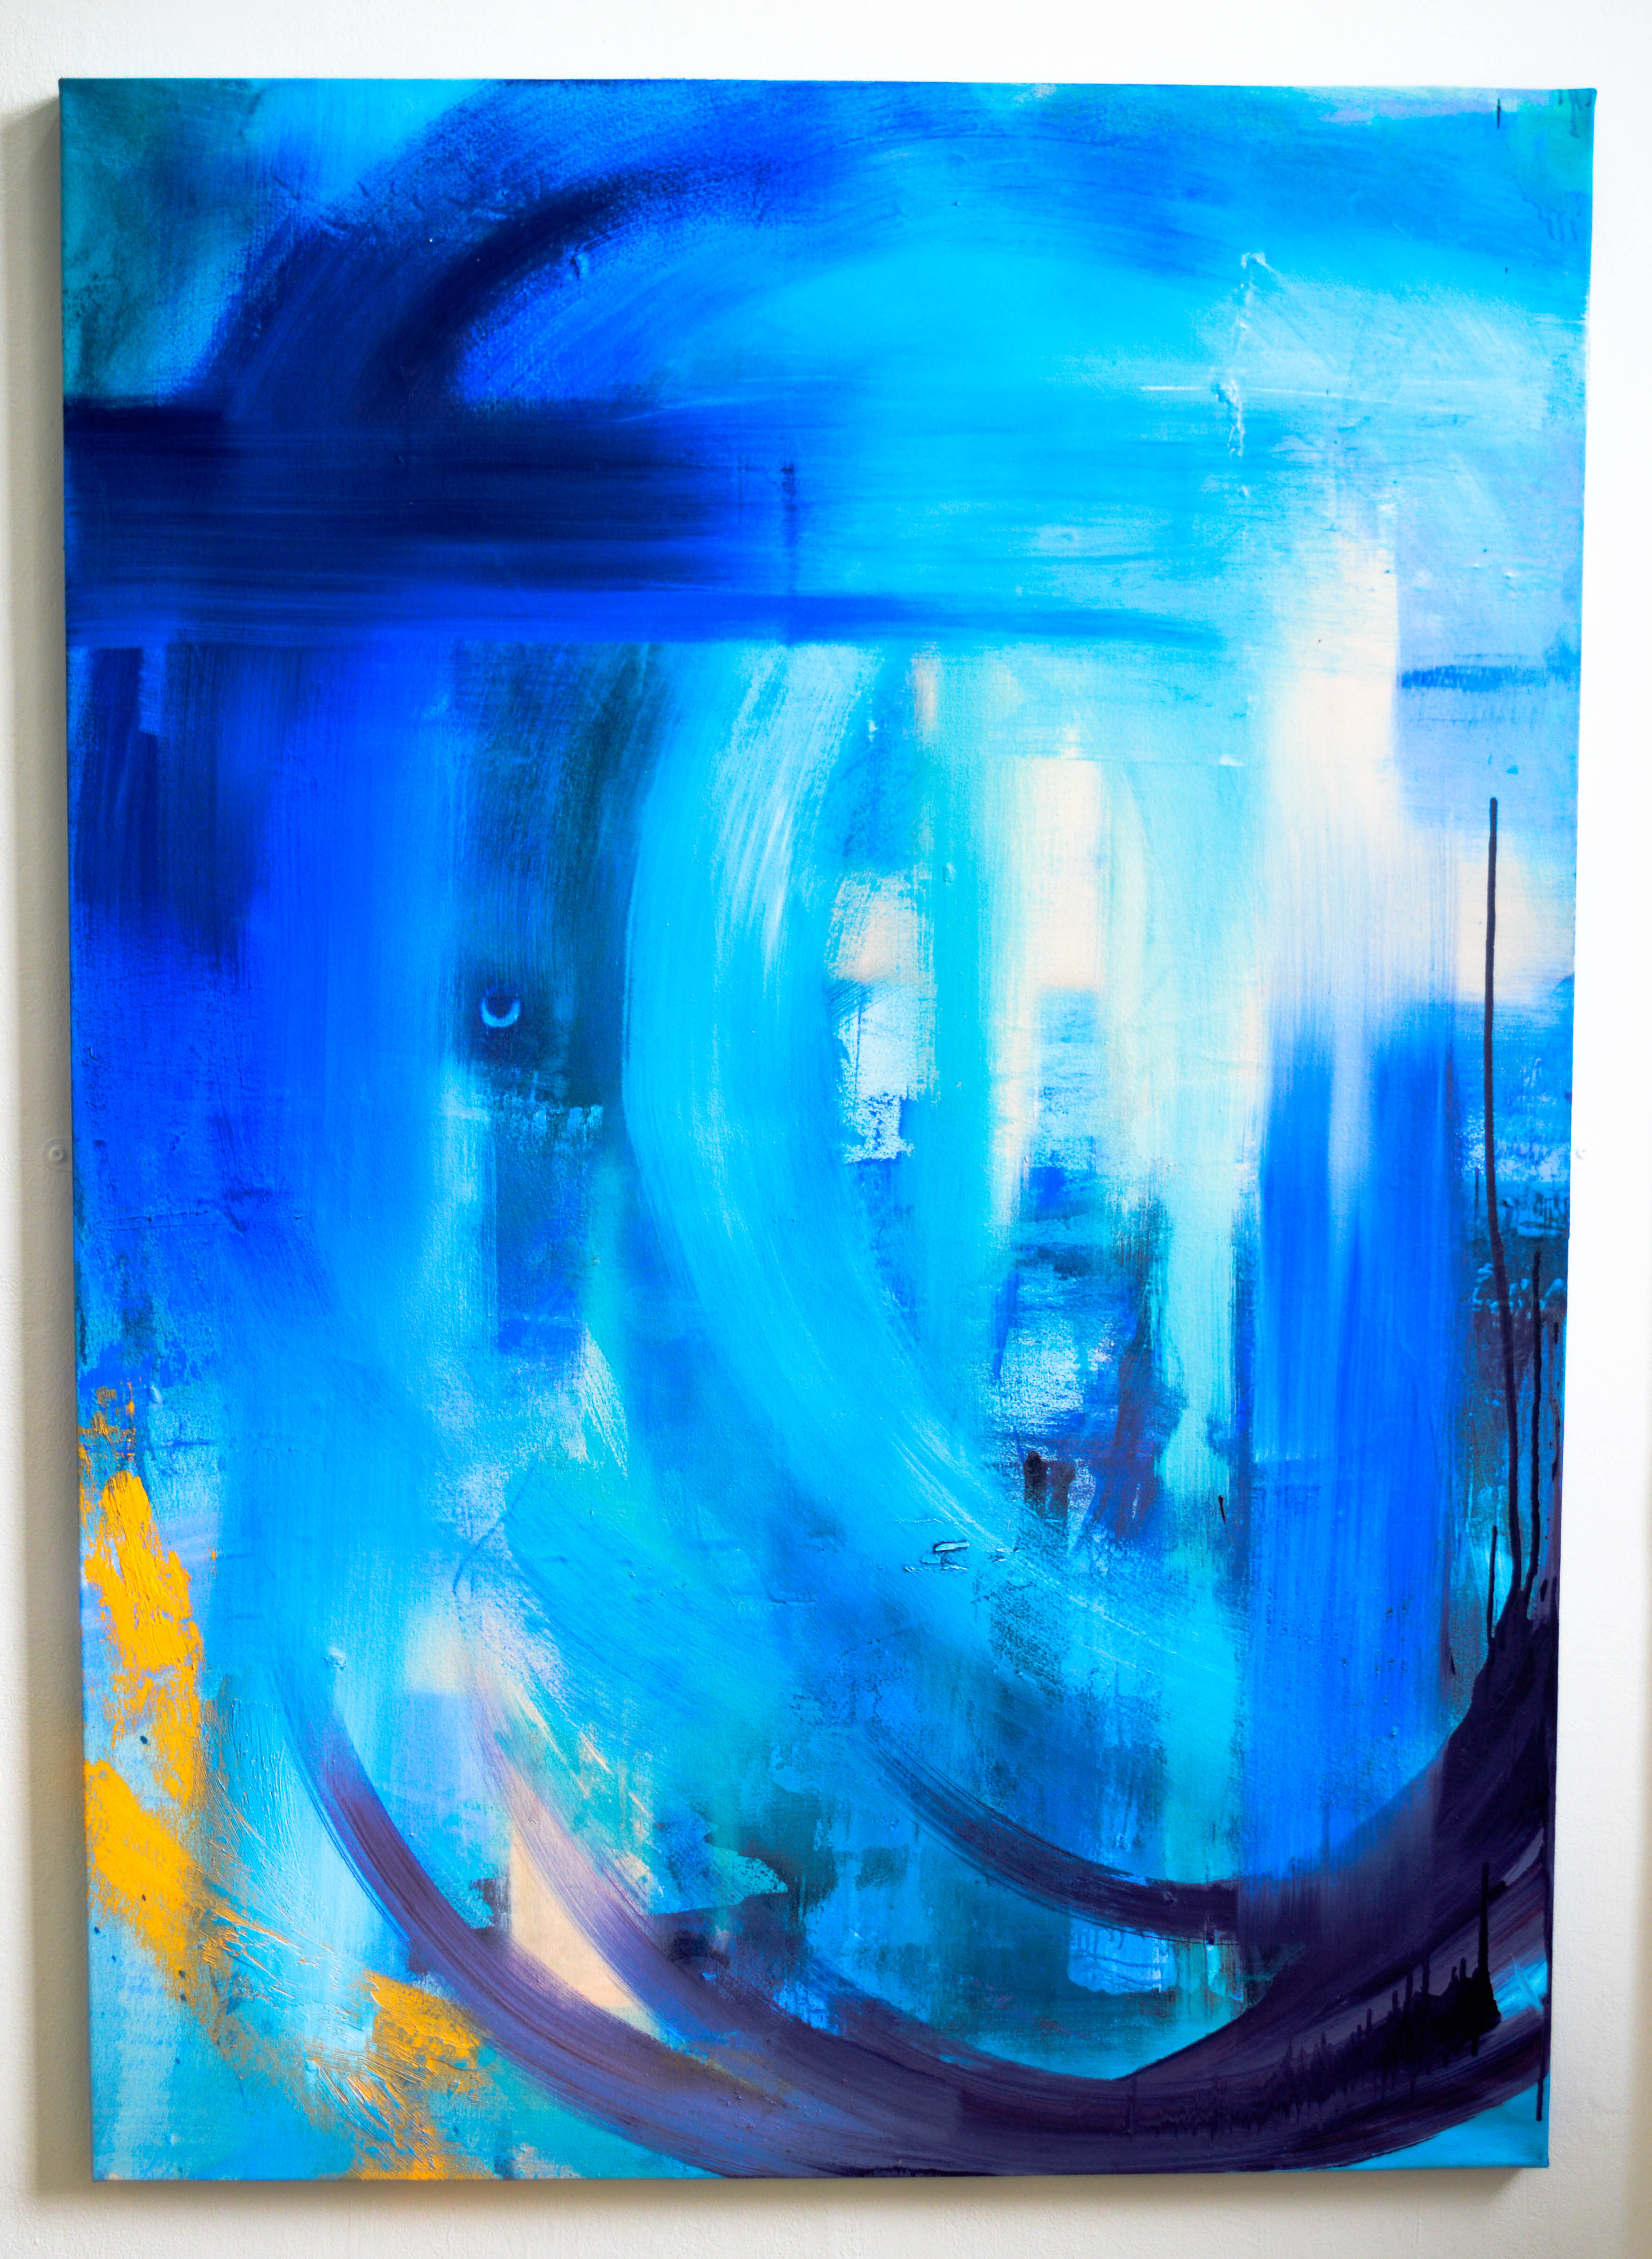 Blue Series 3.1. Oil on canvas. 190.8x114.5cm. For sale.